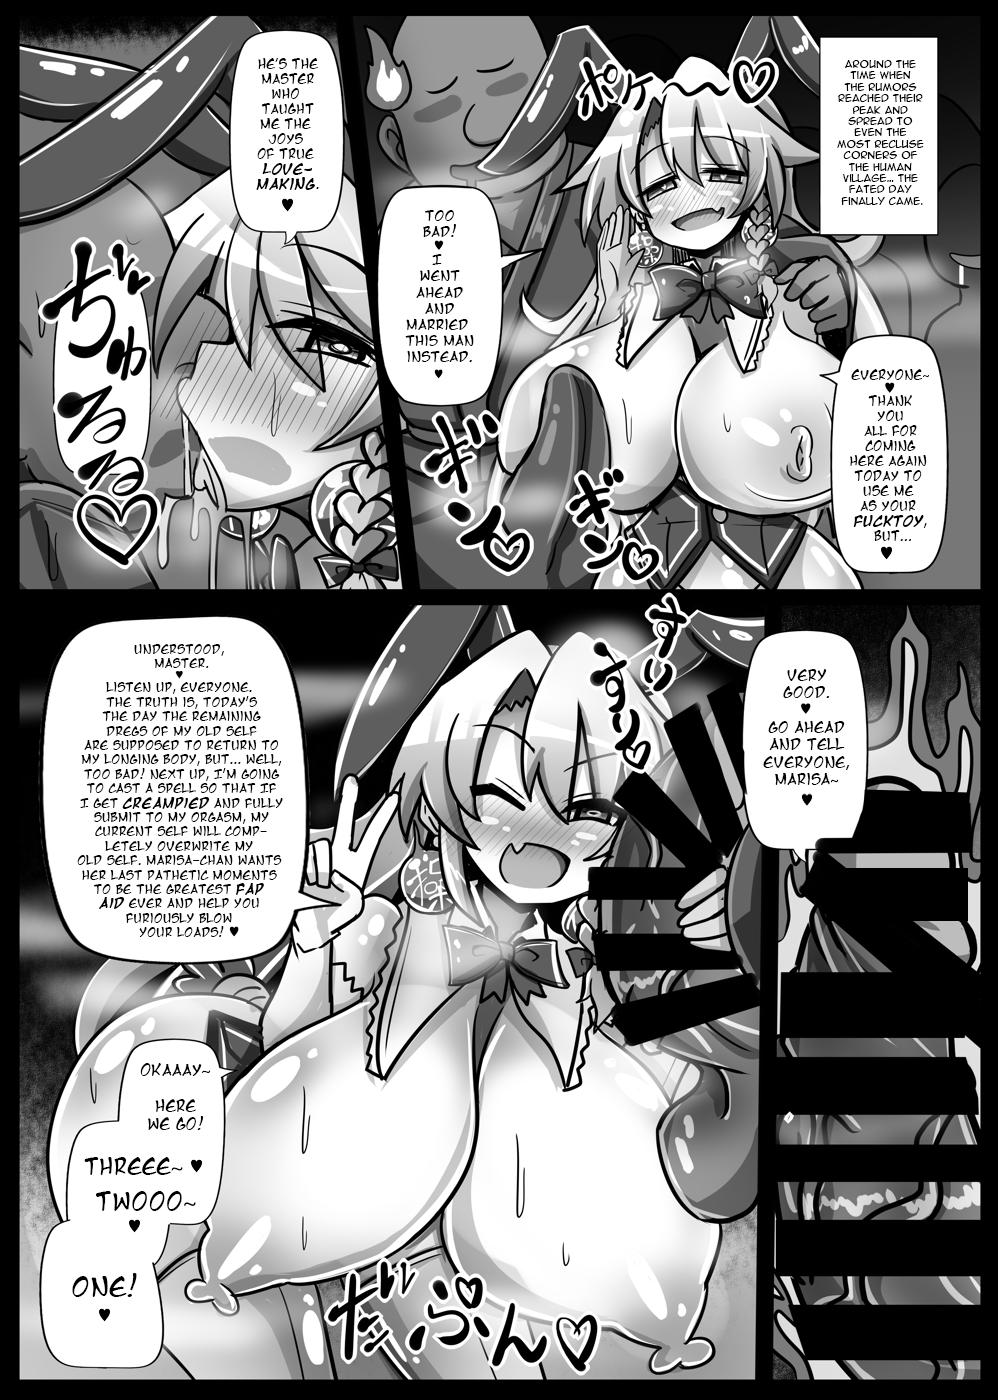 Nuru Paradise of Fake Lovers The Brainwashing of Young Maidens Story 2 - Touhou project Cowgirl - Page 9